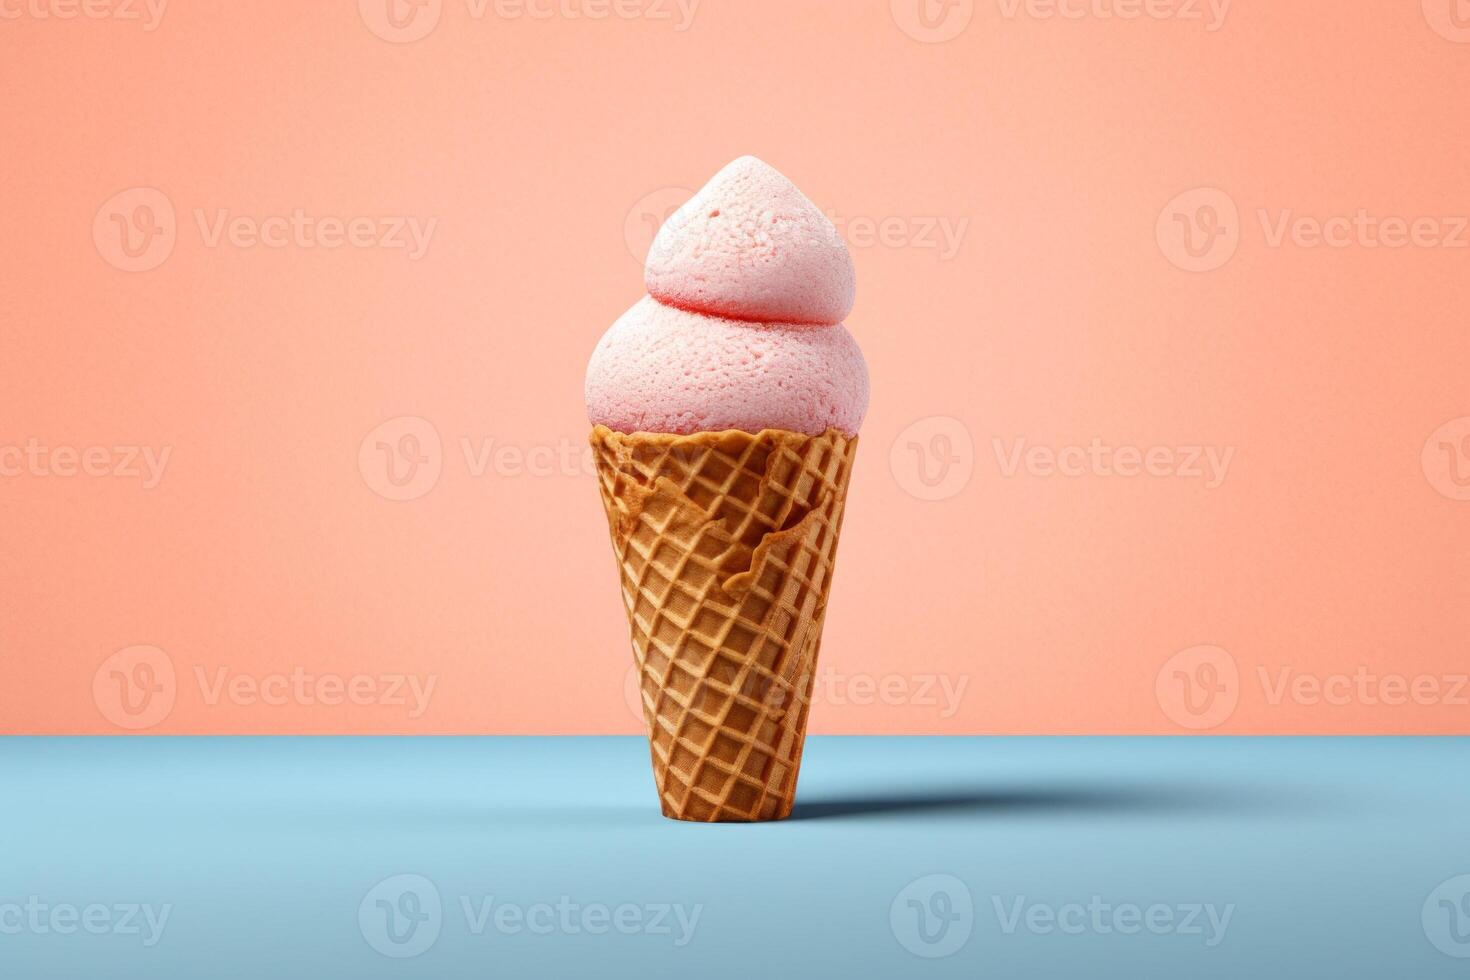 stock photo of ice cream with cone food photography